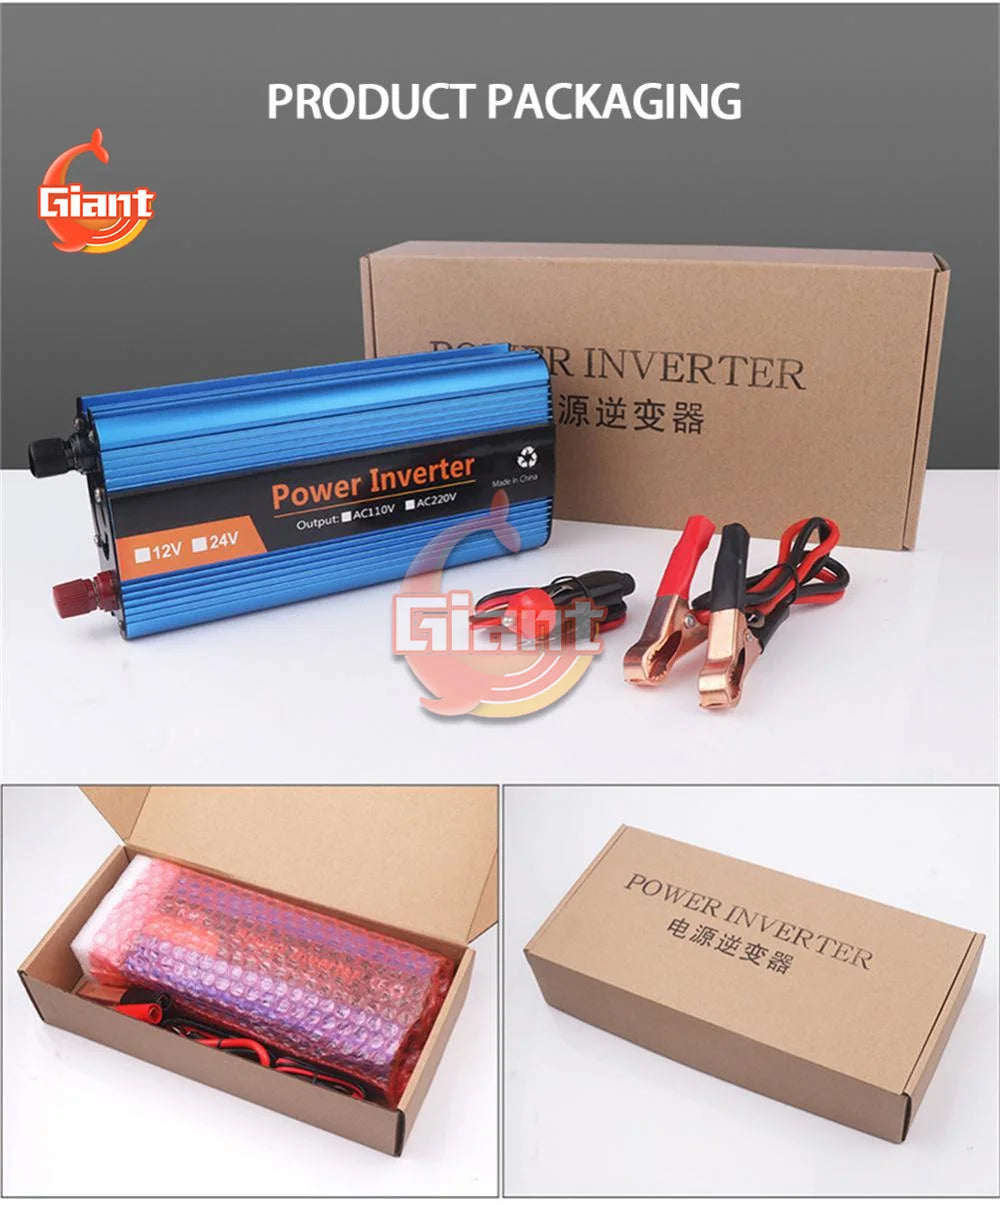 6000W Corrected Sine Wave Inverter, Compact inverter for car and solar systems, converting 12V DC to 220V AC.